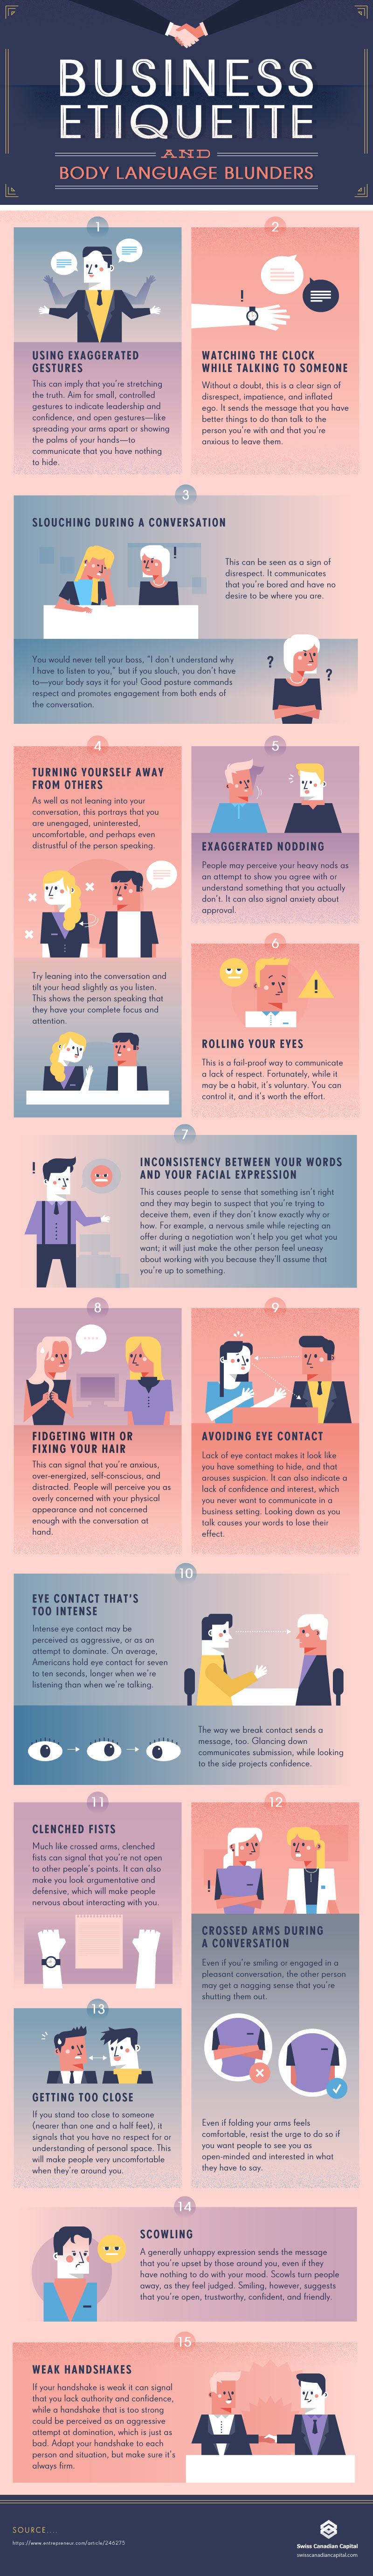 Business Etiquette And Body Language Blunders #Infographic